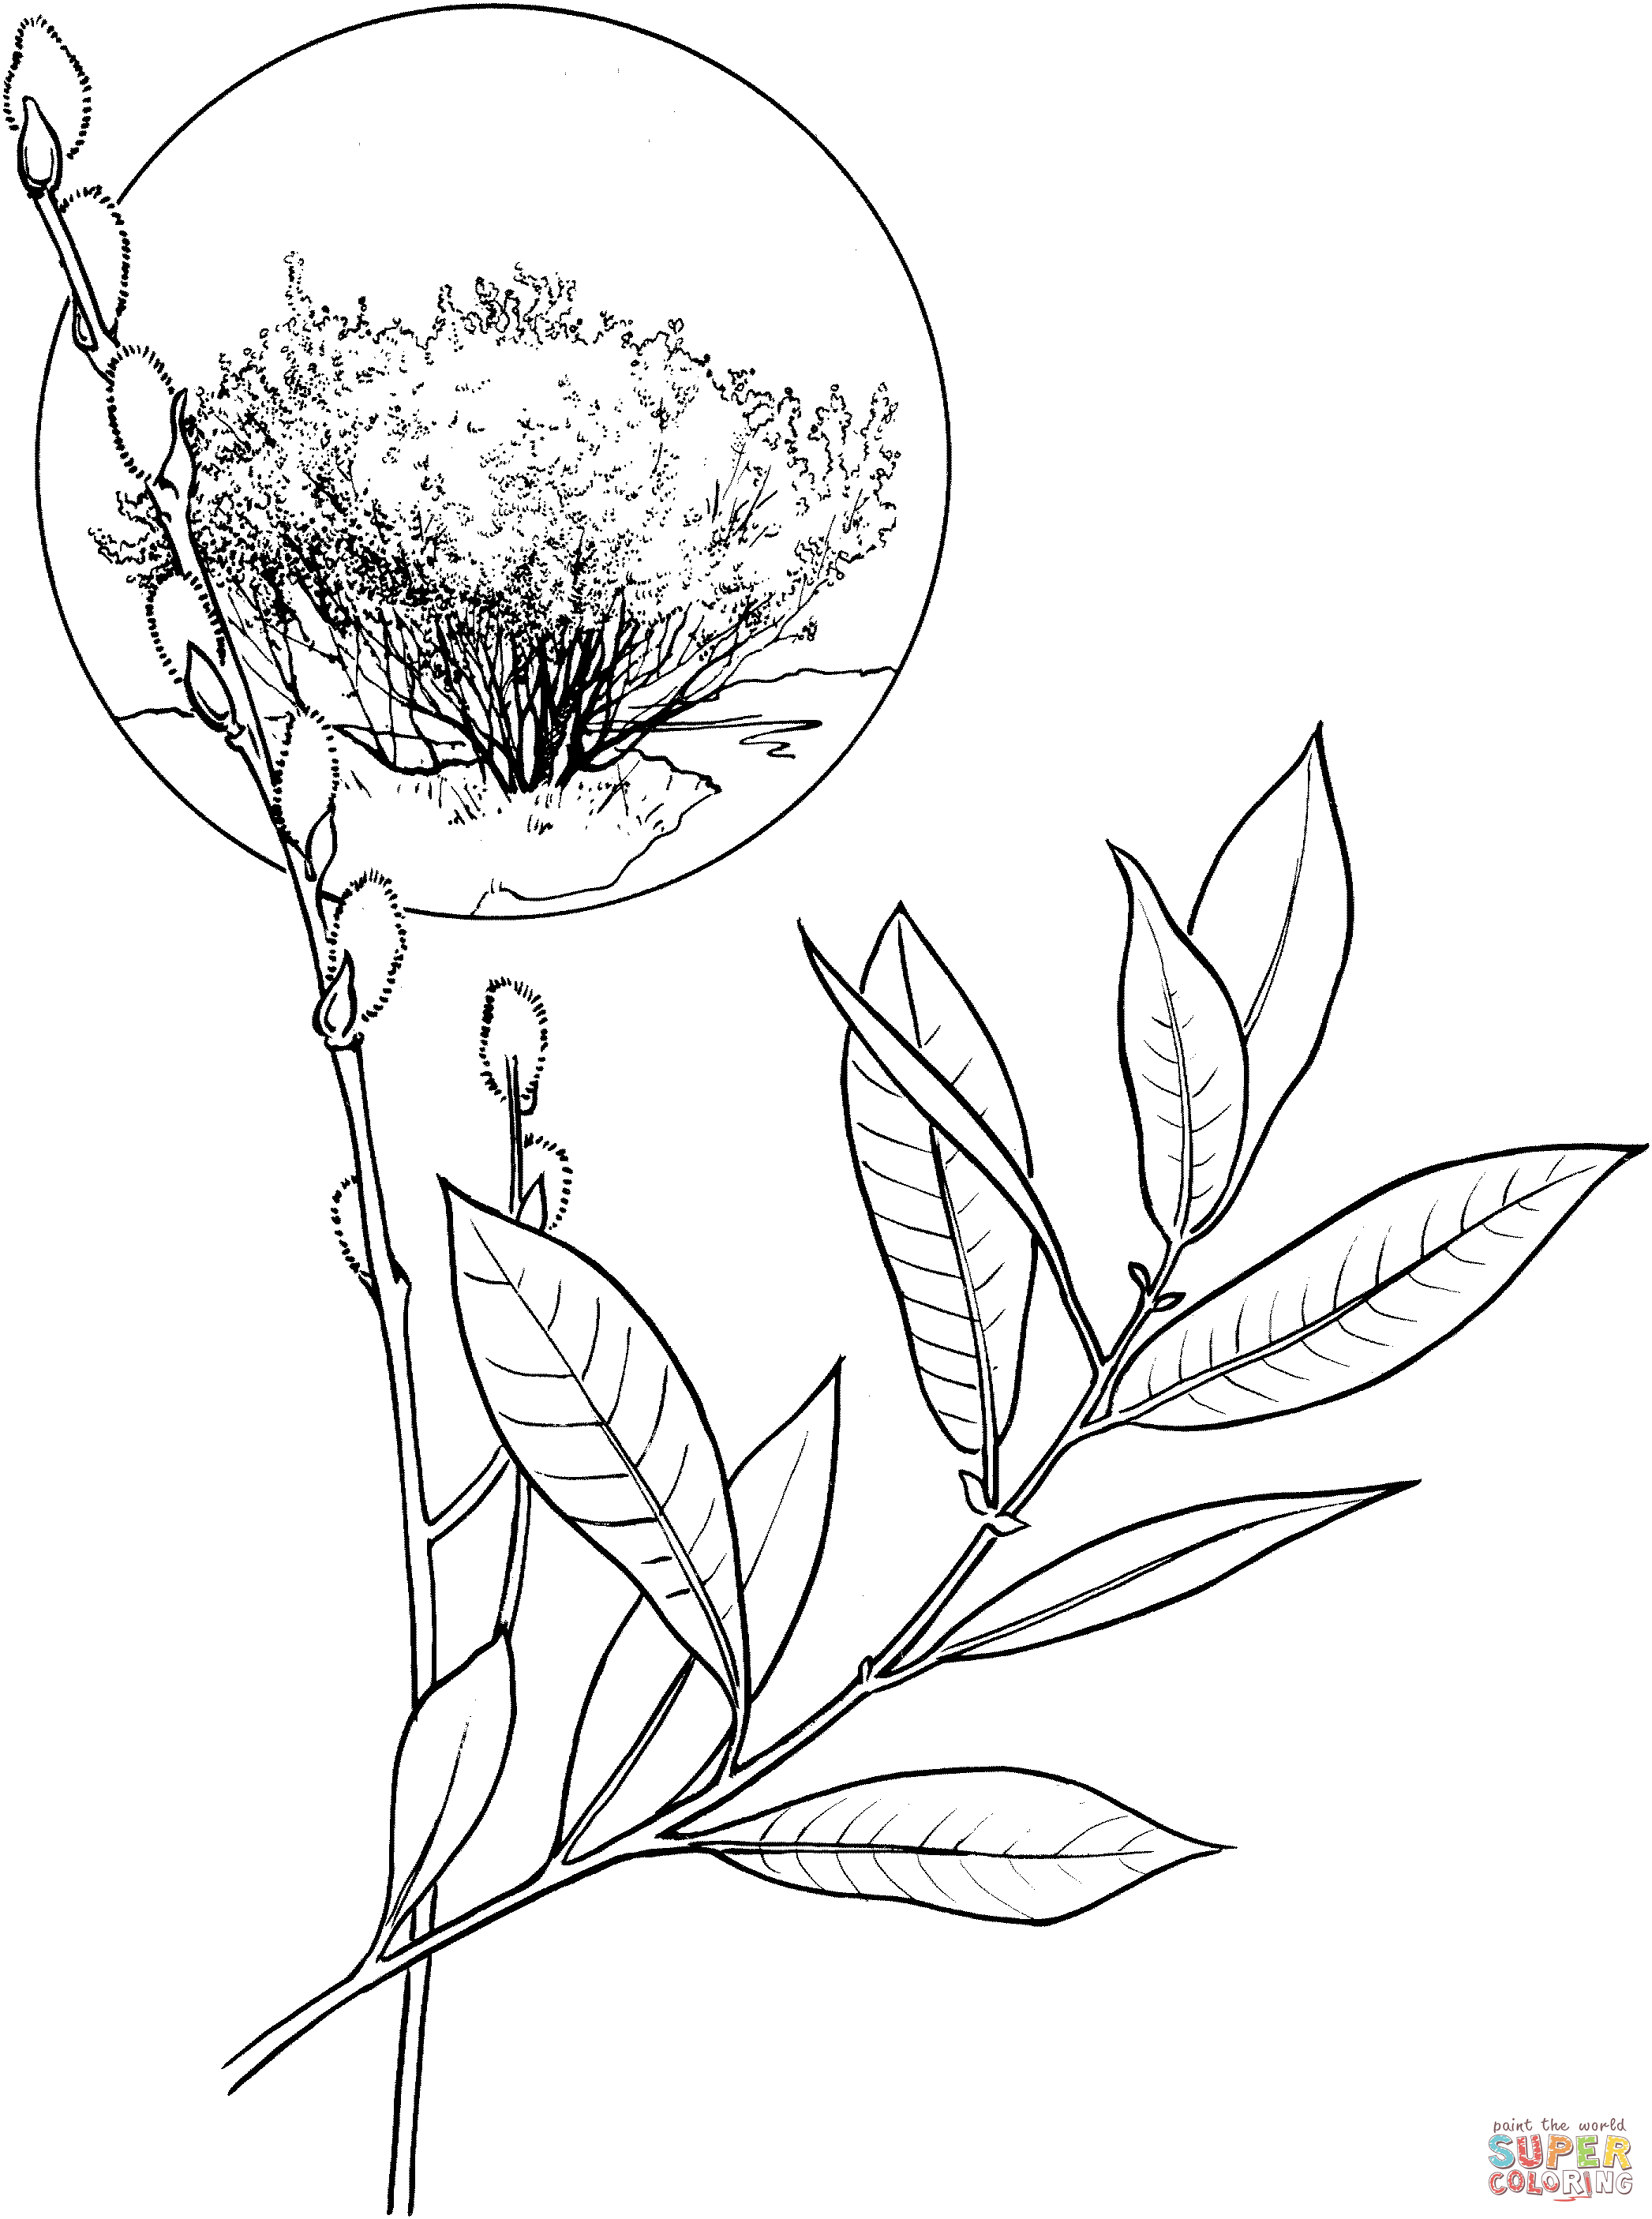 American Willow Tree coloring page | Free Printable Coloring Pages